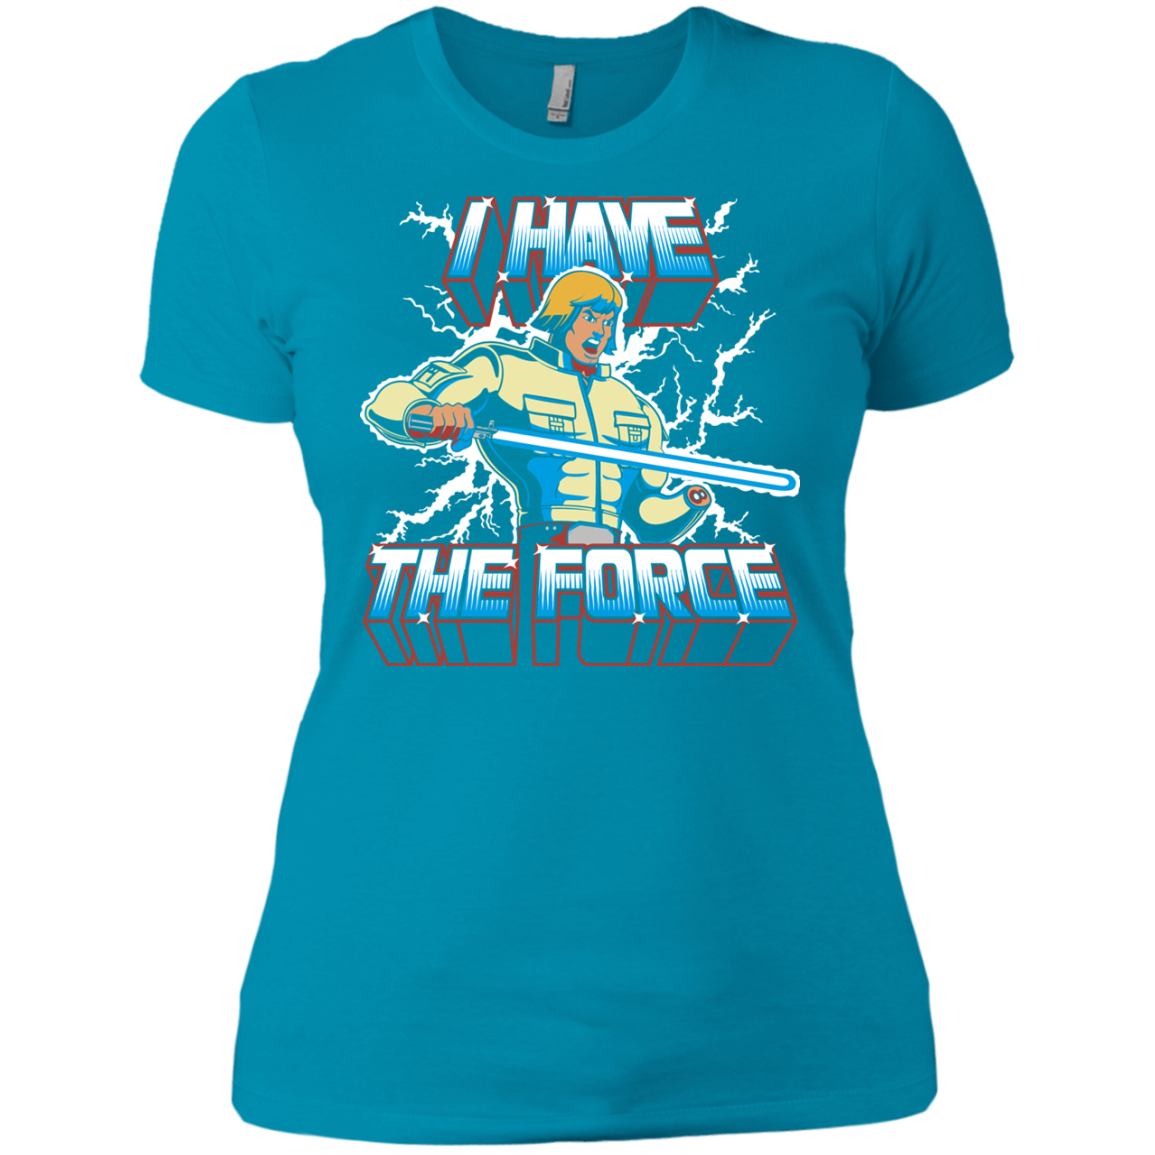 I Have the Force Women's Premium T-Shirt